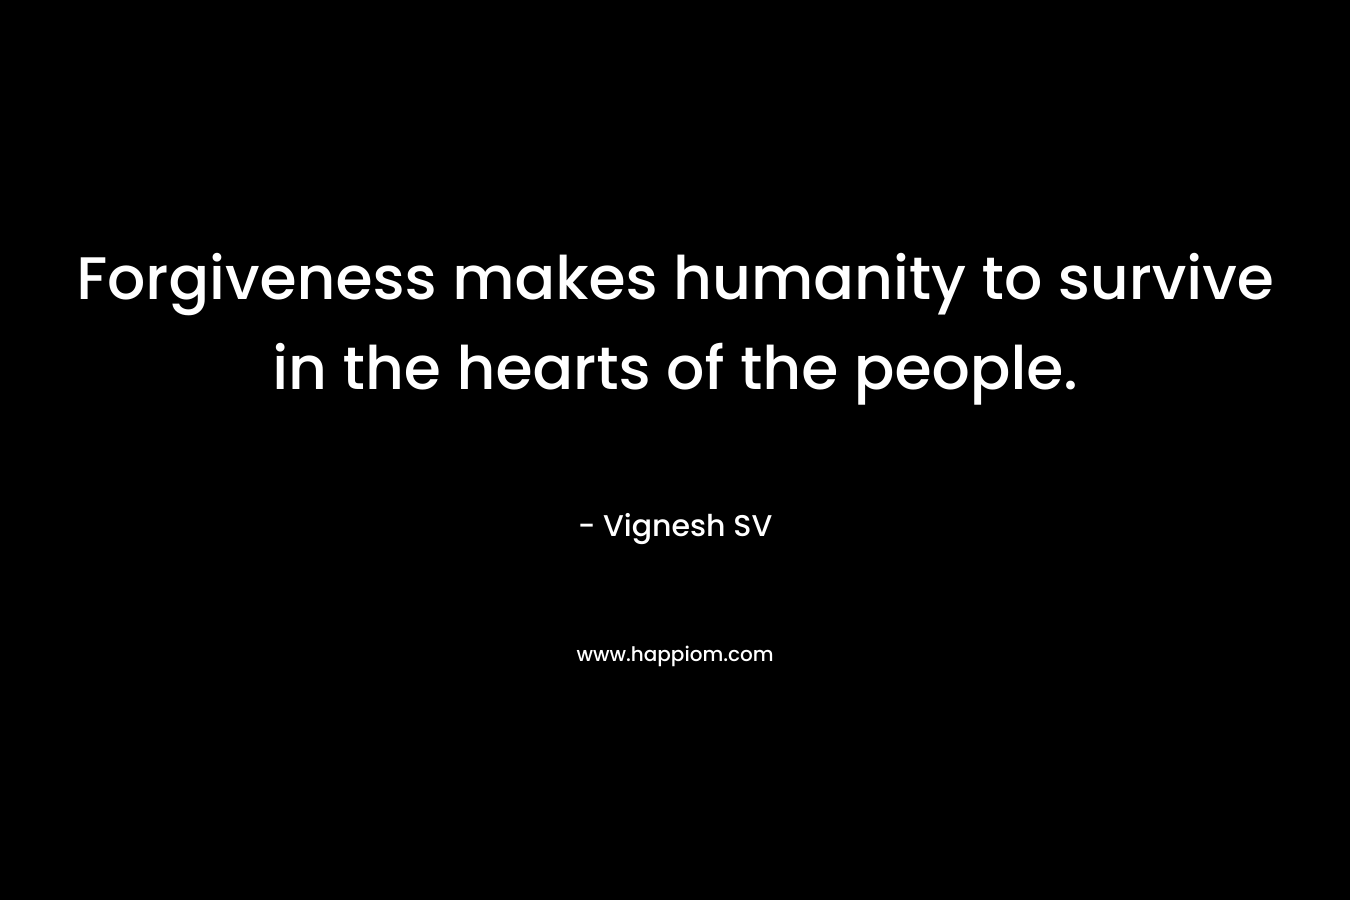 Forgiveness makes humanity to survive in the hearts of the people.